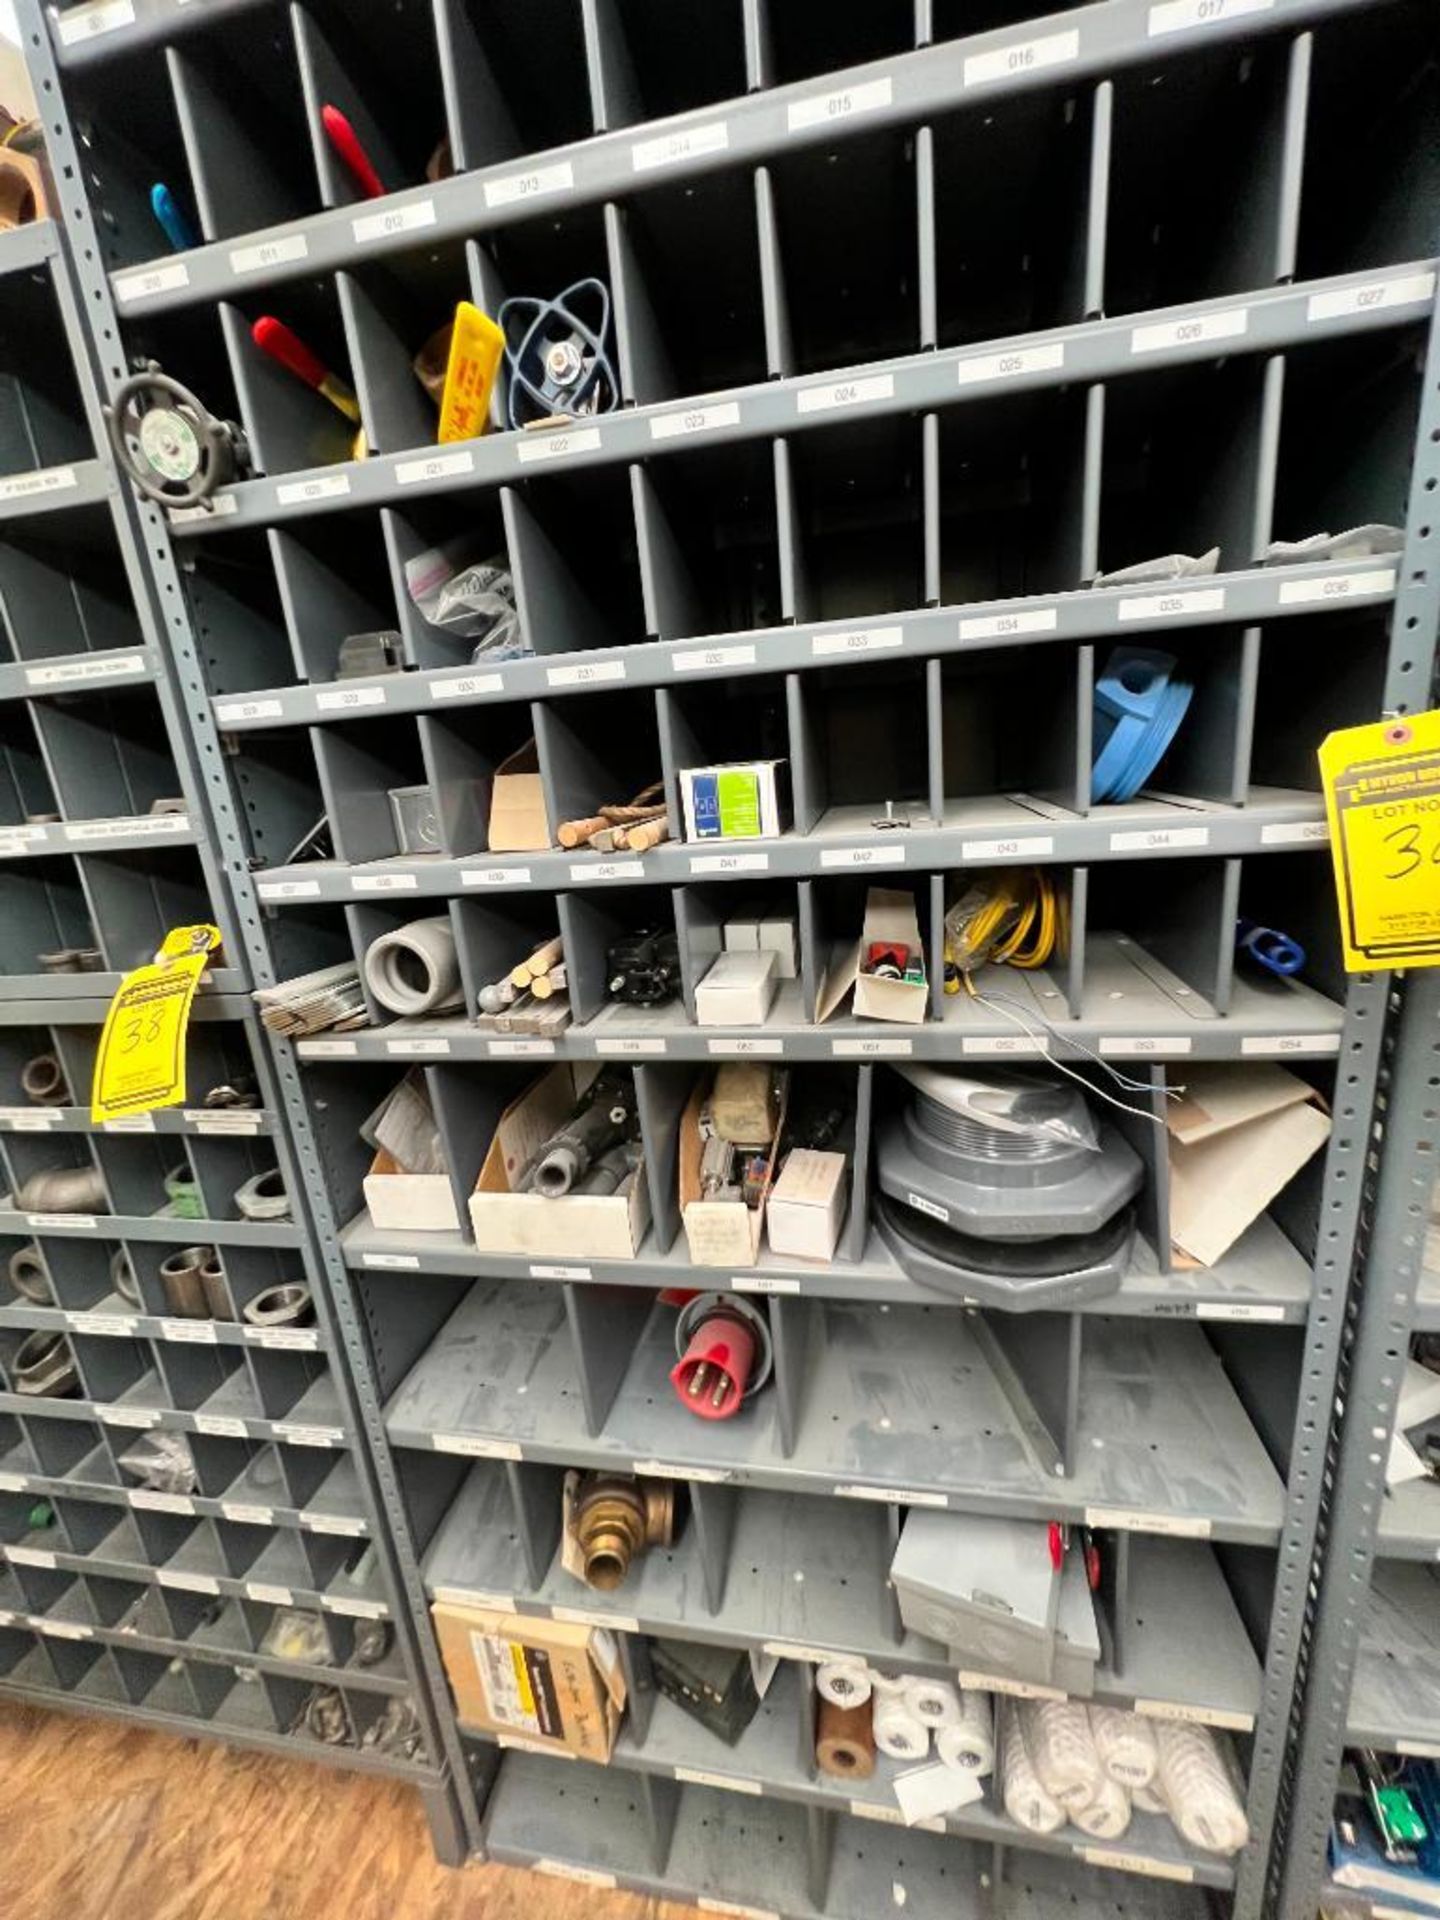 (28) Shelves of Assorted Parts, VERY LARGE LOT Consisting of MRO, Drives, Valves, PLC, Nuts, Bolts, - Image 54 of 67